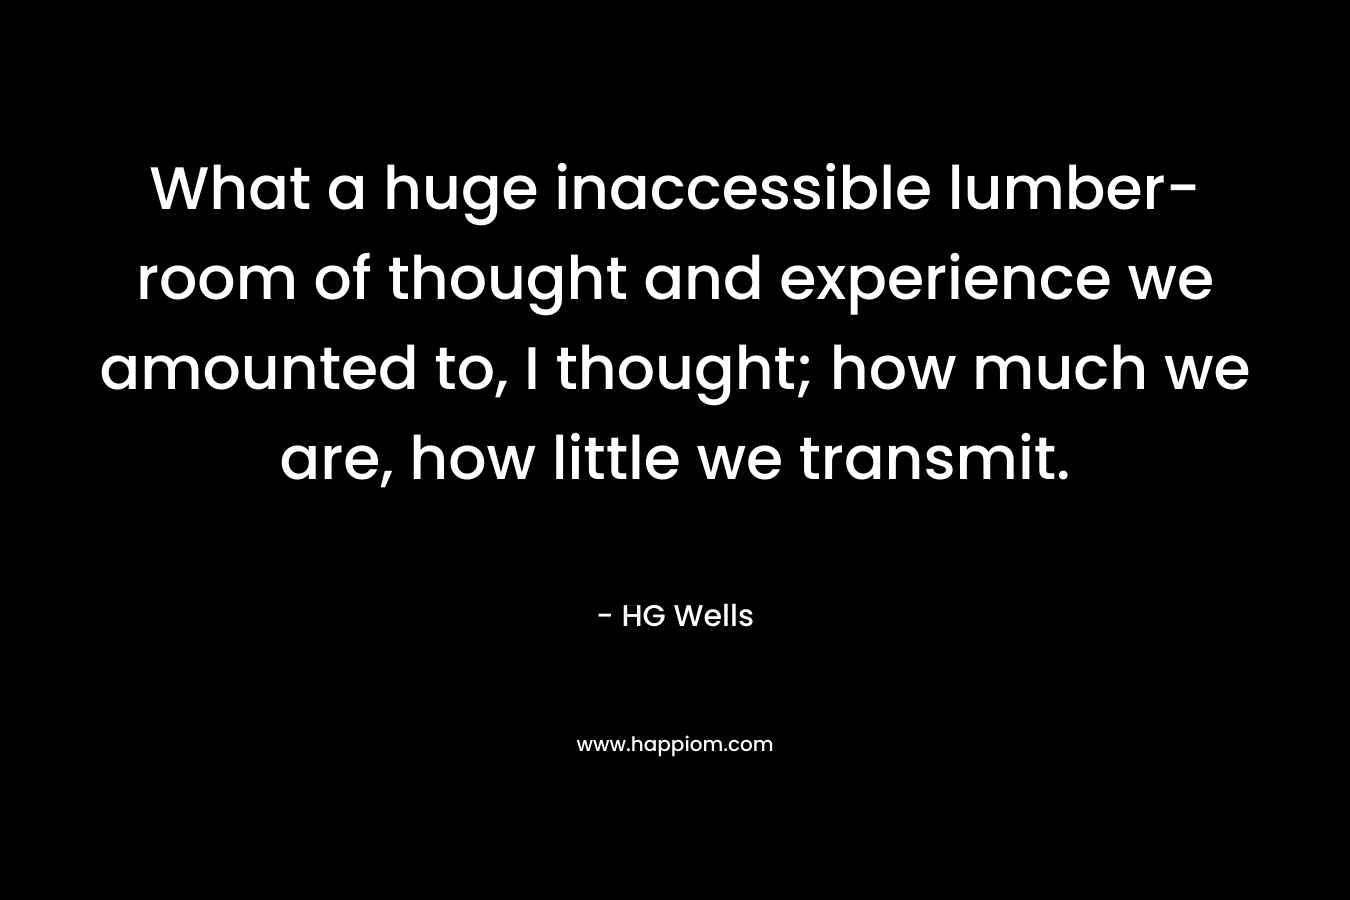 What a huge inaccessible lumber-room of thought and experience we amounted to, I thought; how much we are, how little we transmit. – HG Wells